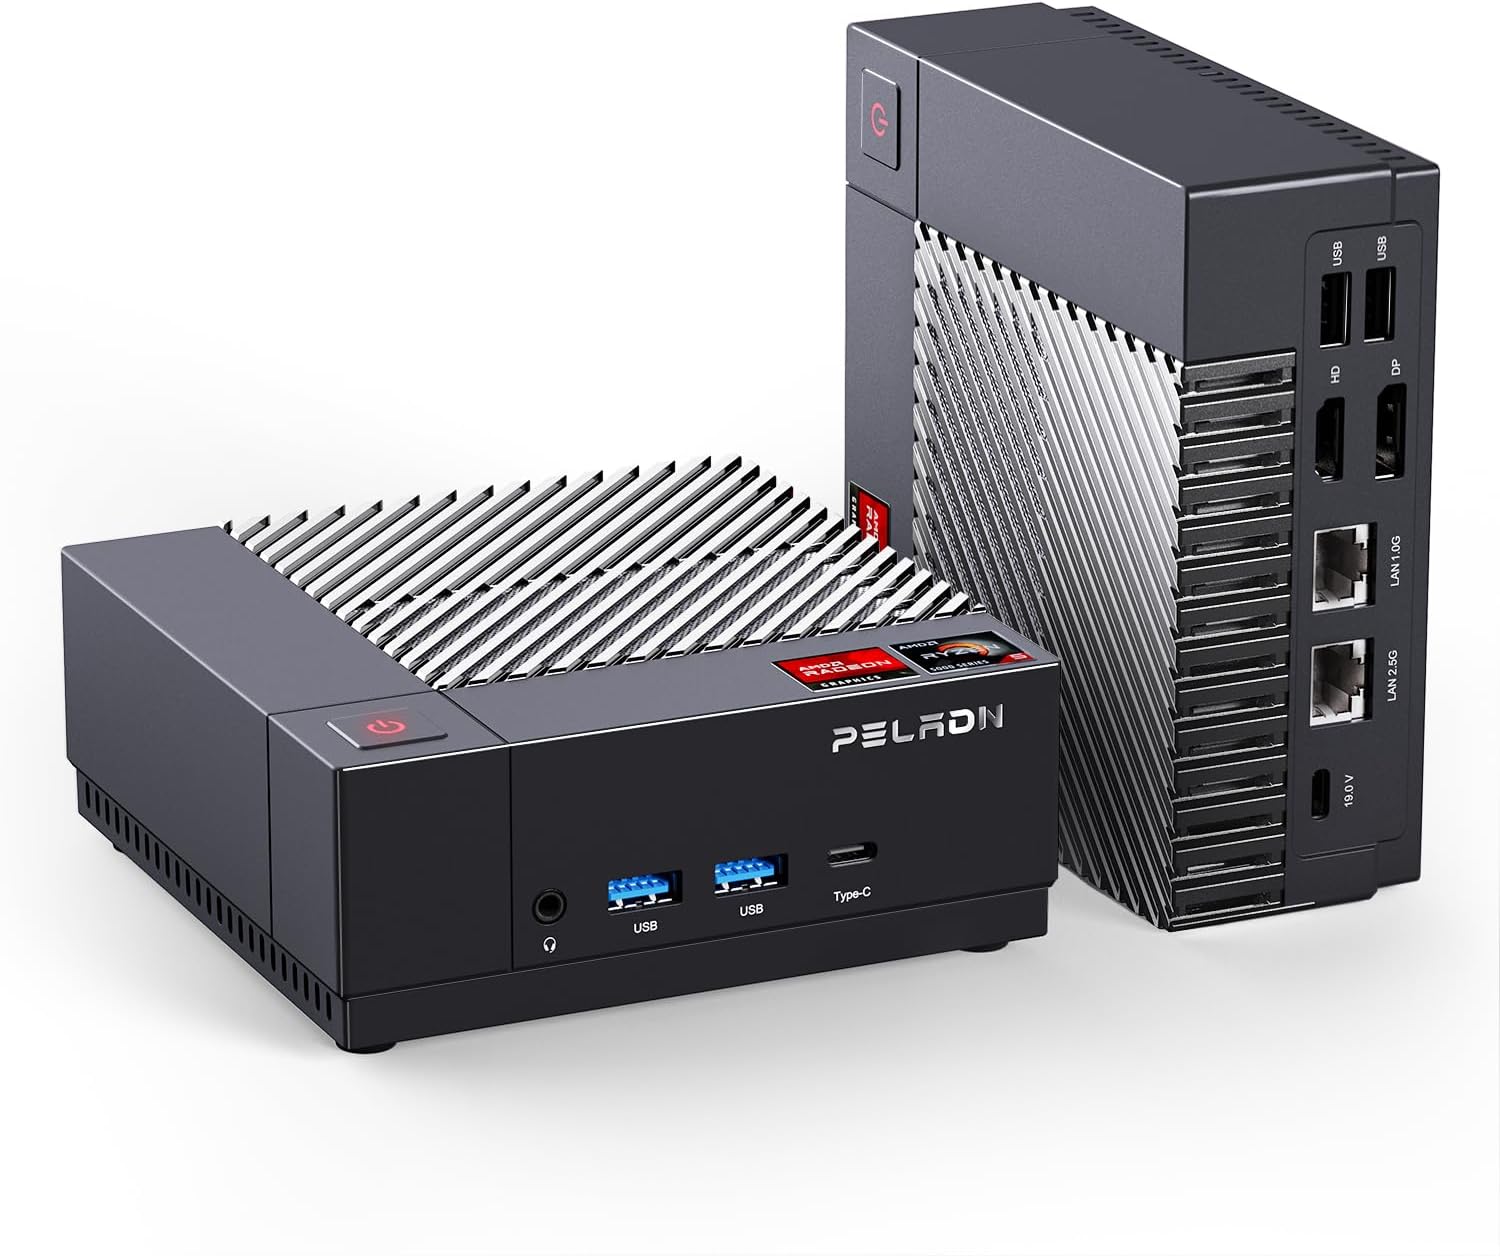 PELADN Mini PC AMD Ryzen 7 5500U(6C/12T, up to 4.0GHz), HA-3 Mini Gaming PC with 16GB RAM and 512GB M.2 2280 SSD, Win 11 Pro Dual LAN Mini Desktop PC with WiFi 6/BT5.2/USB-C for Game and Daily Use